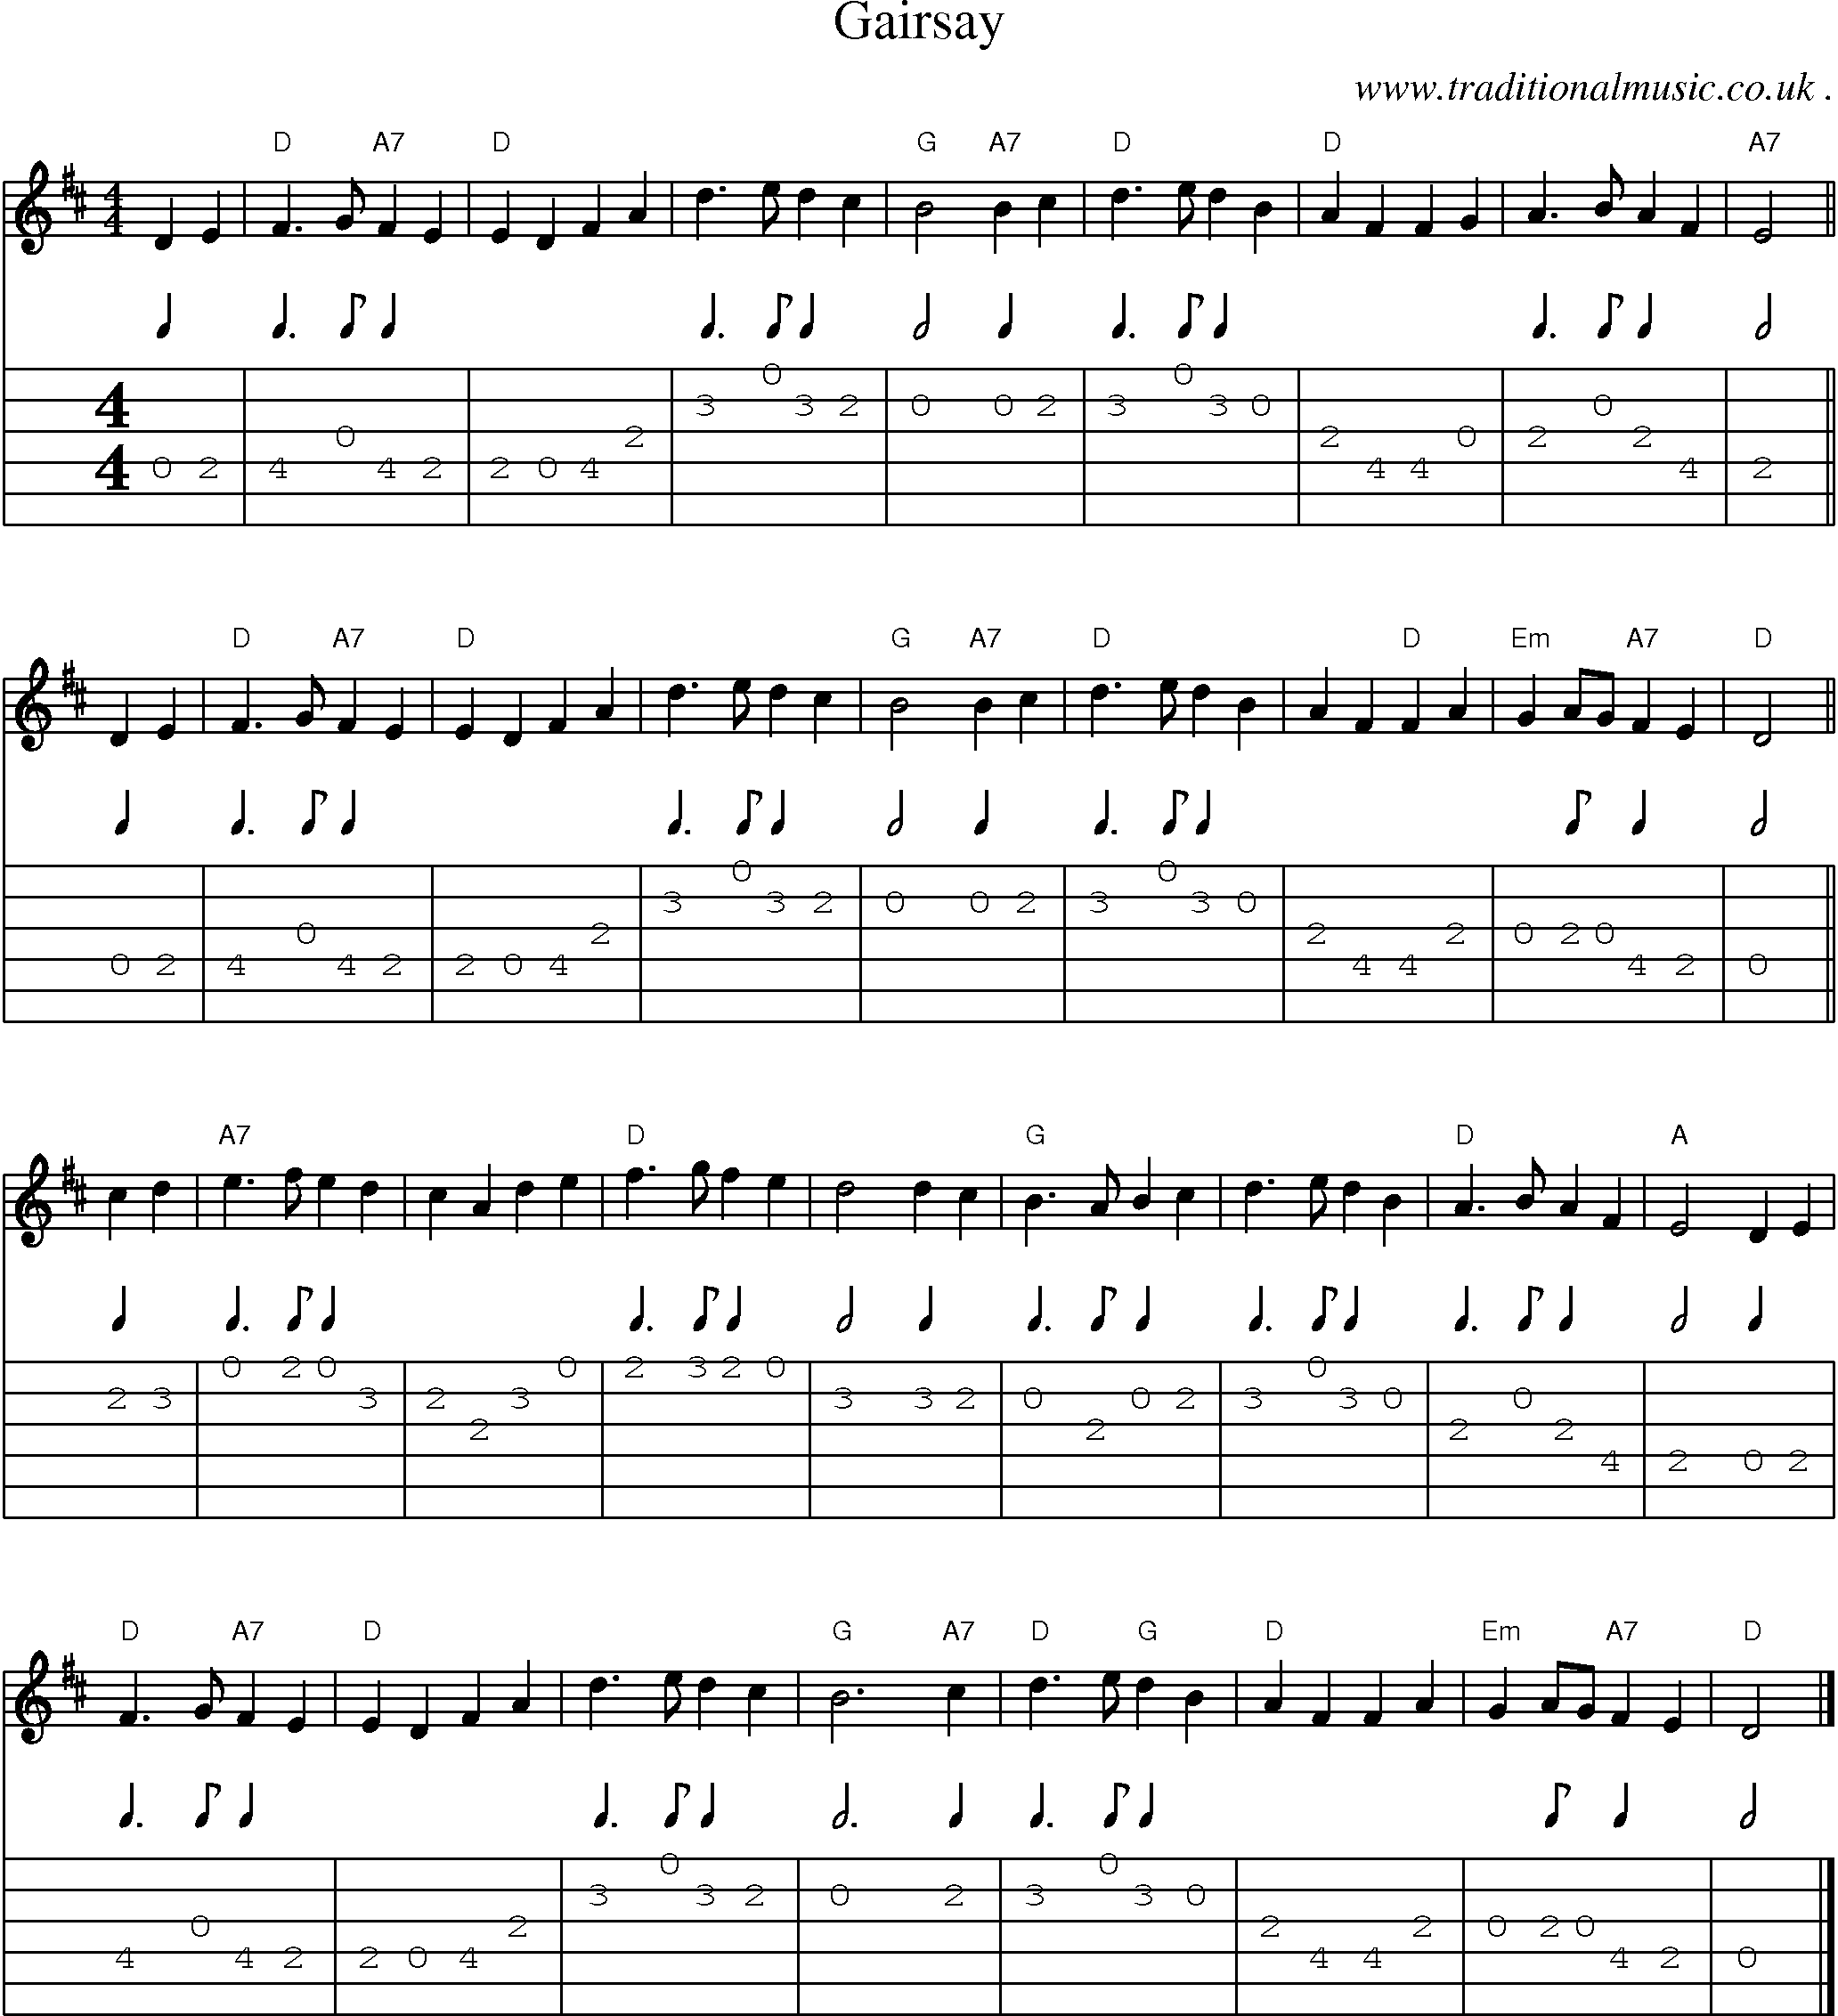 Music Score and Guitar Tabs for Gairsay